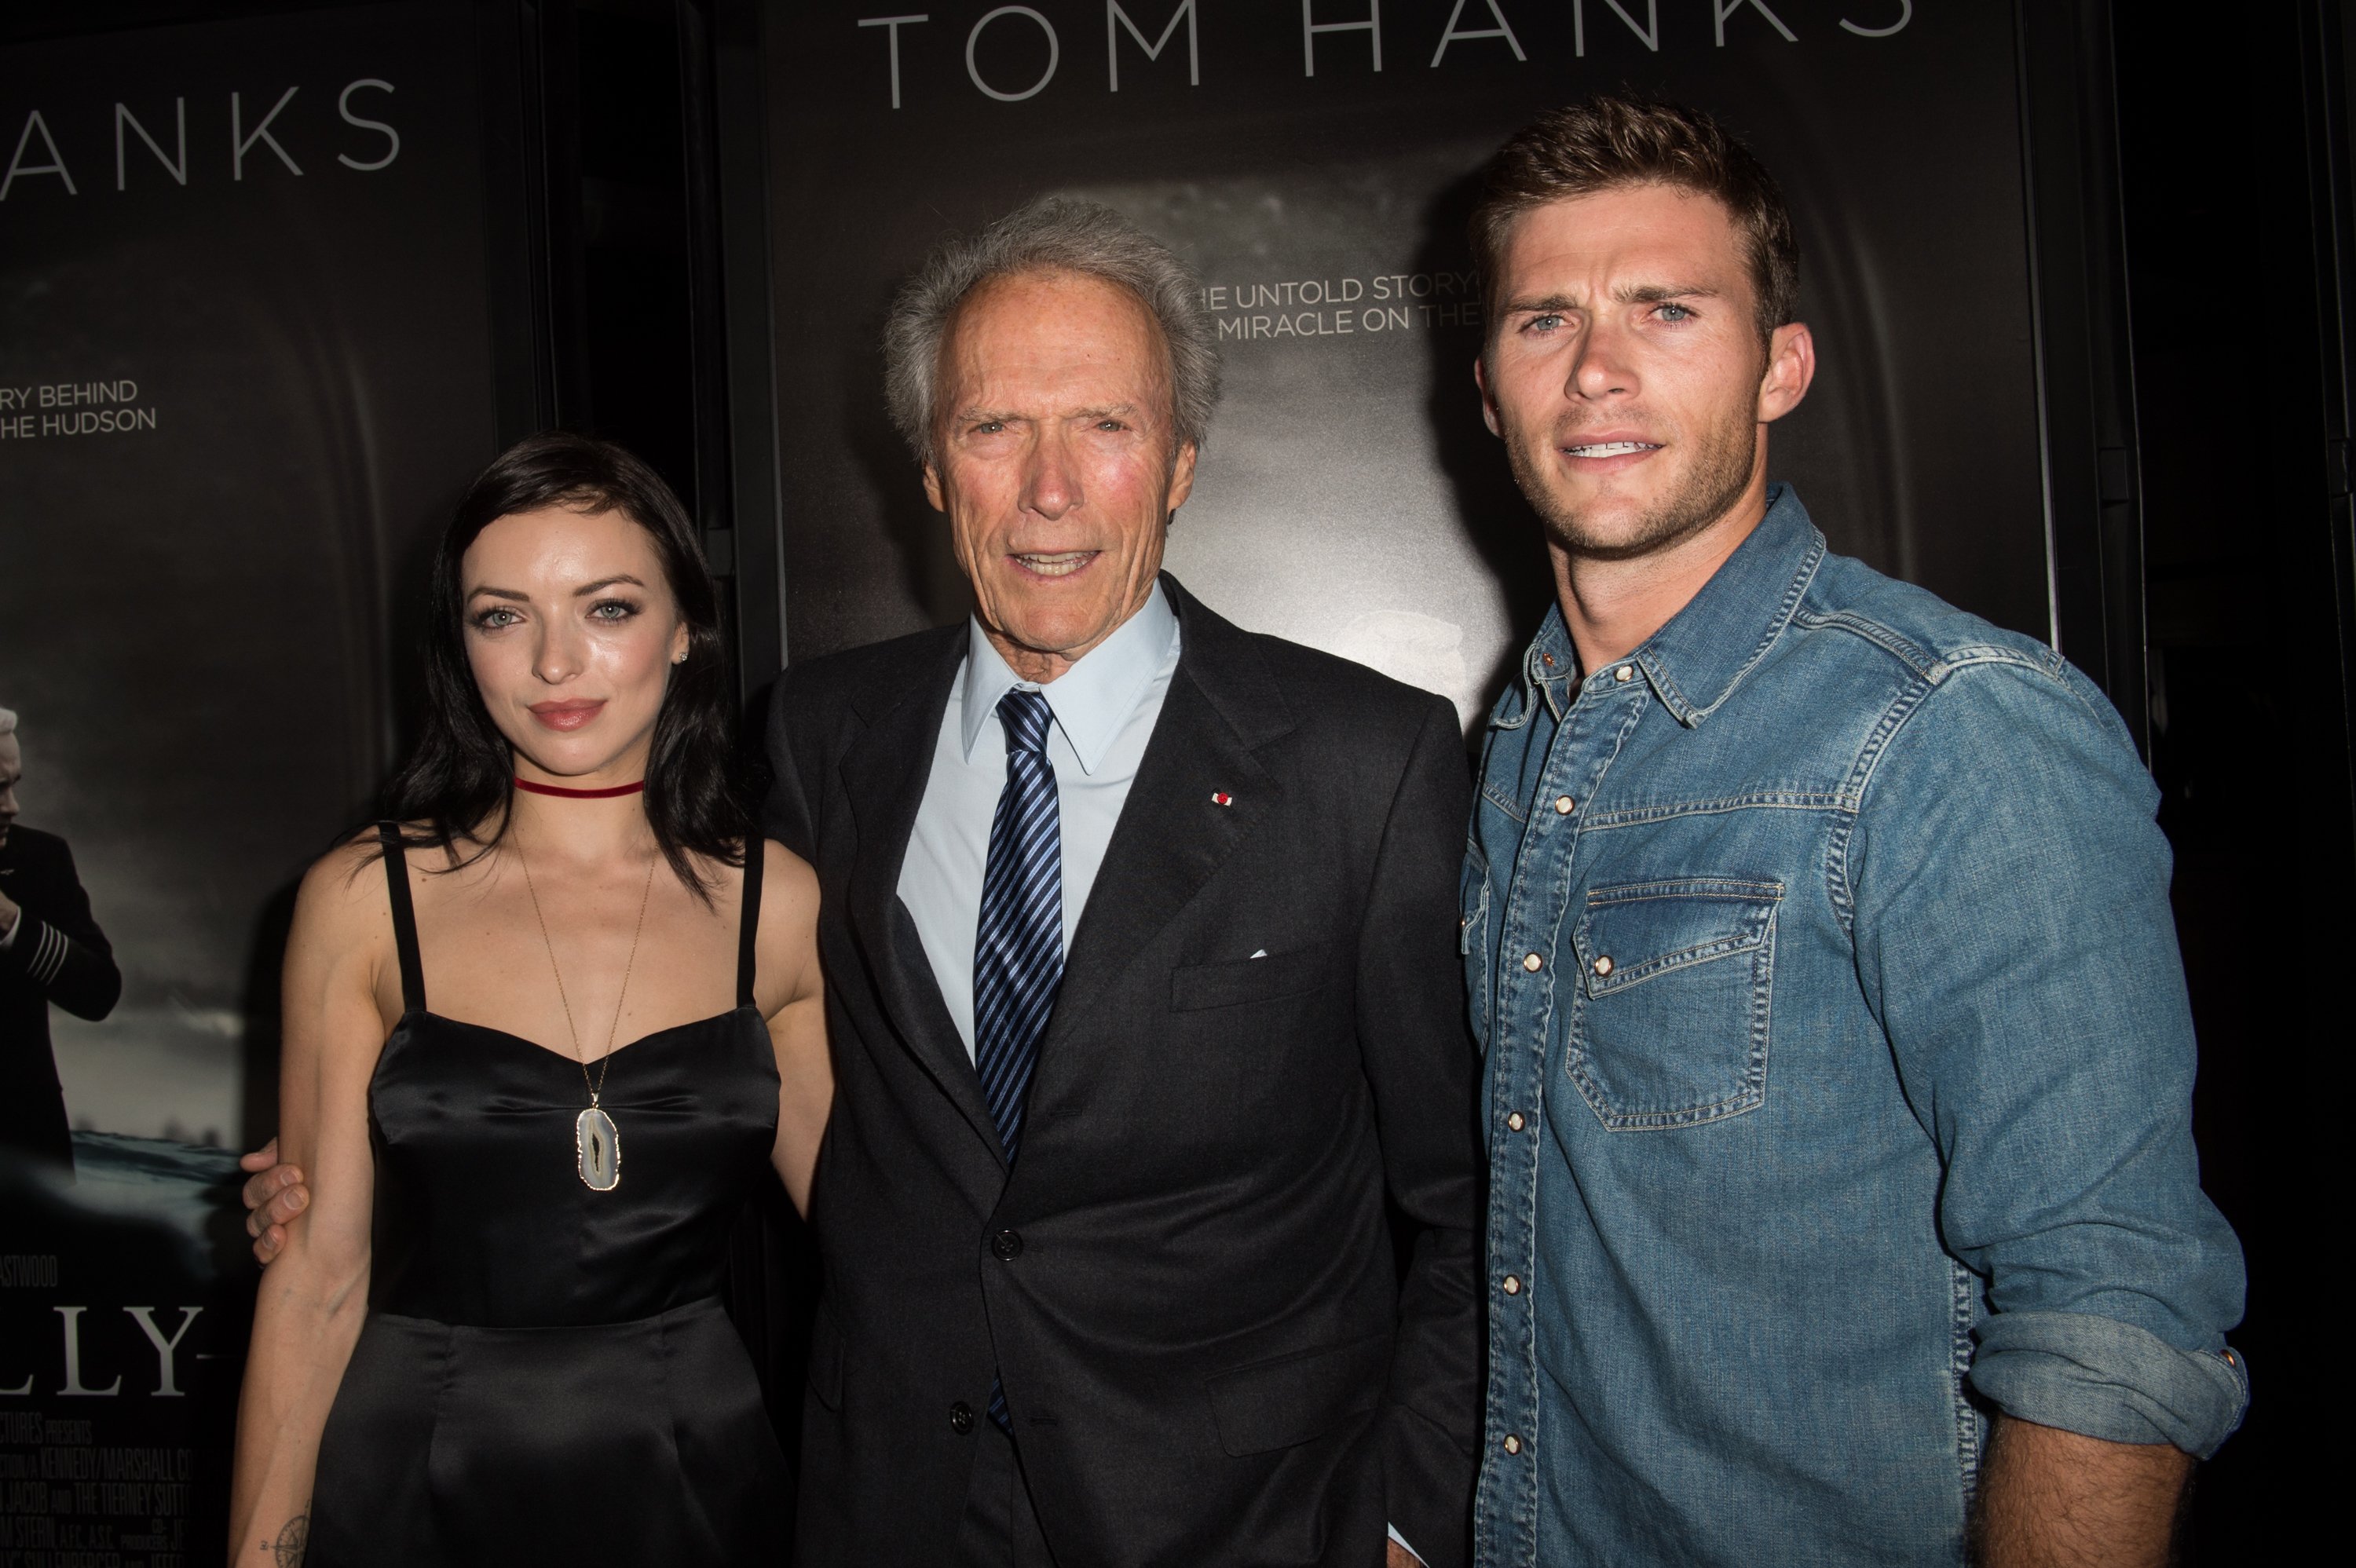 Francesca Eastwood, Clint Eastwood, and Scott Eastwood attend "Sully" film screening at Directors Guild of America on September 8, 2016, in Los Angeles, California. | Source: Getty Images